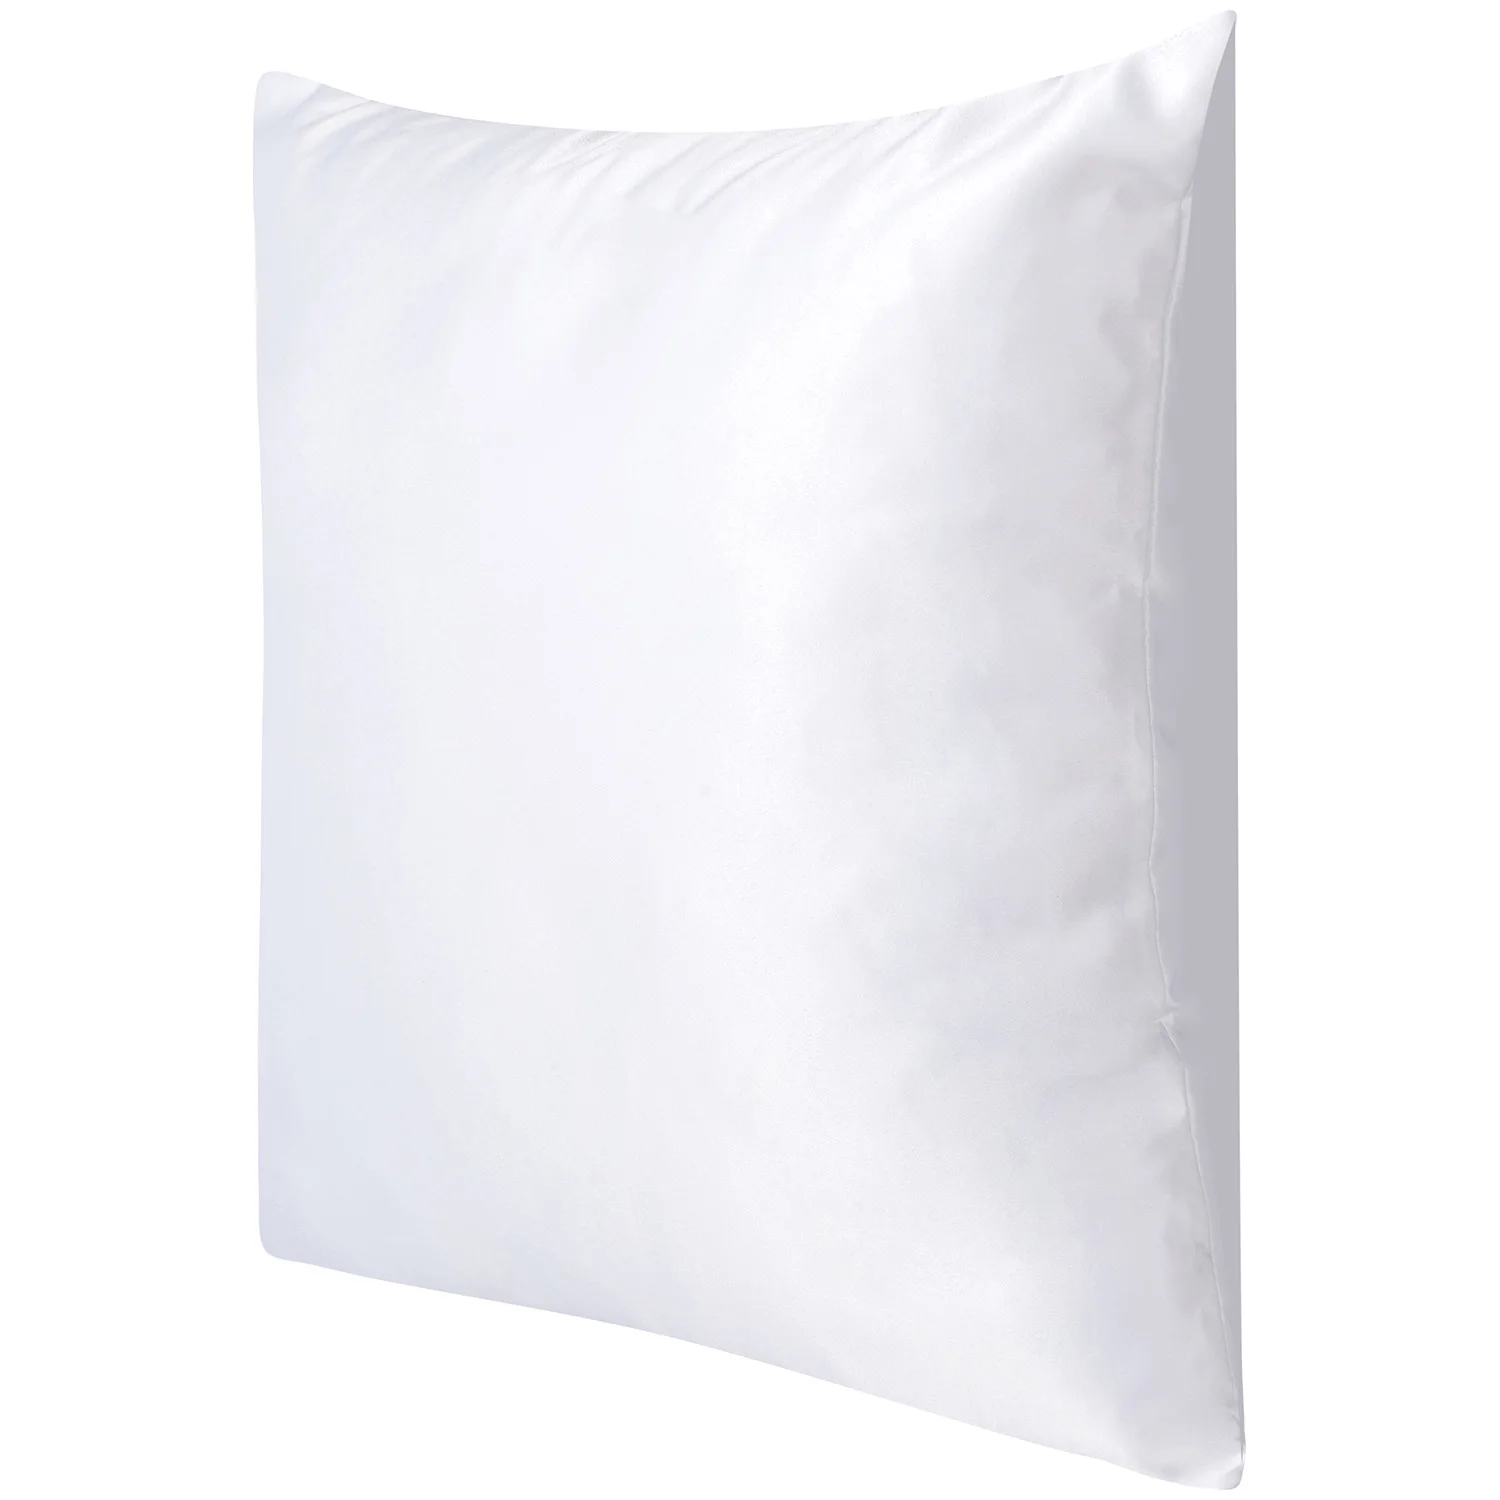 Details about   50Pcs White Sublimation Blanks Pillow Case Throw Cushion Cover DIY Printed Gift 